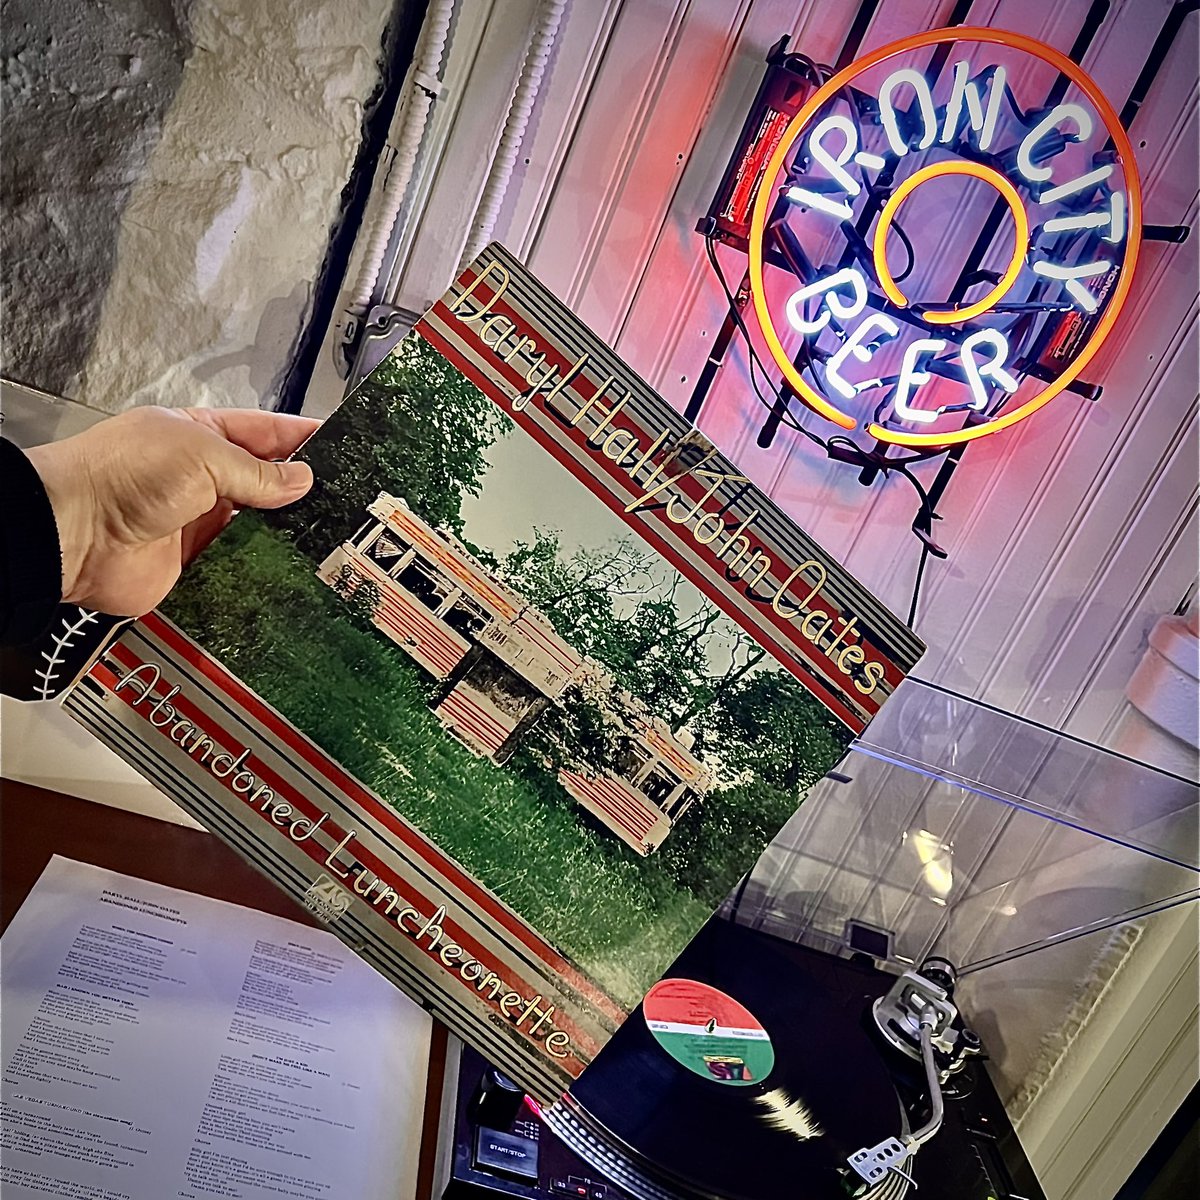 It’s been on my want list for awhile… and it’s a bit crusty… but for $7 - I figured why not?

#HallAndOates
#AbandonedLuncheonette

And it’s what’s spinning in Pittsburgh… (without a restraining order) 🤣